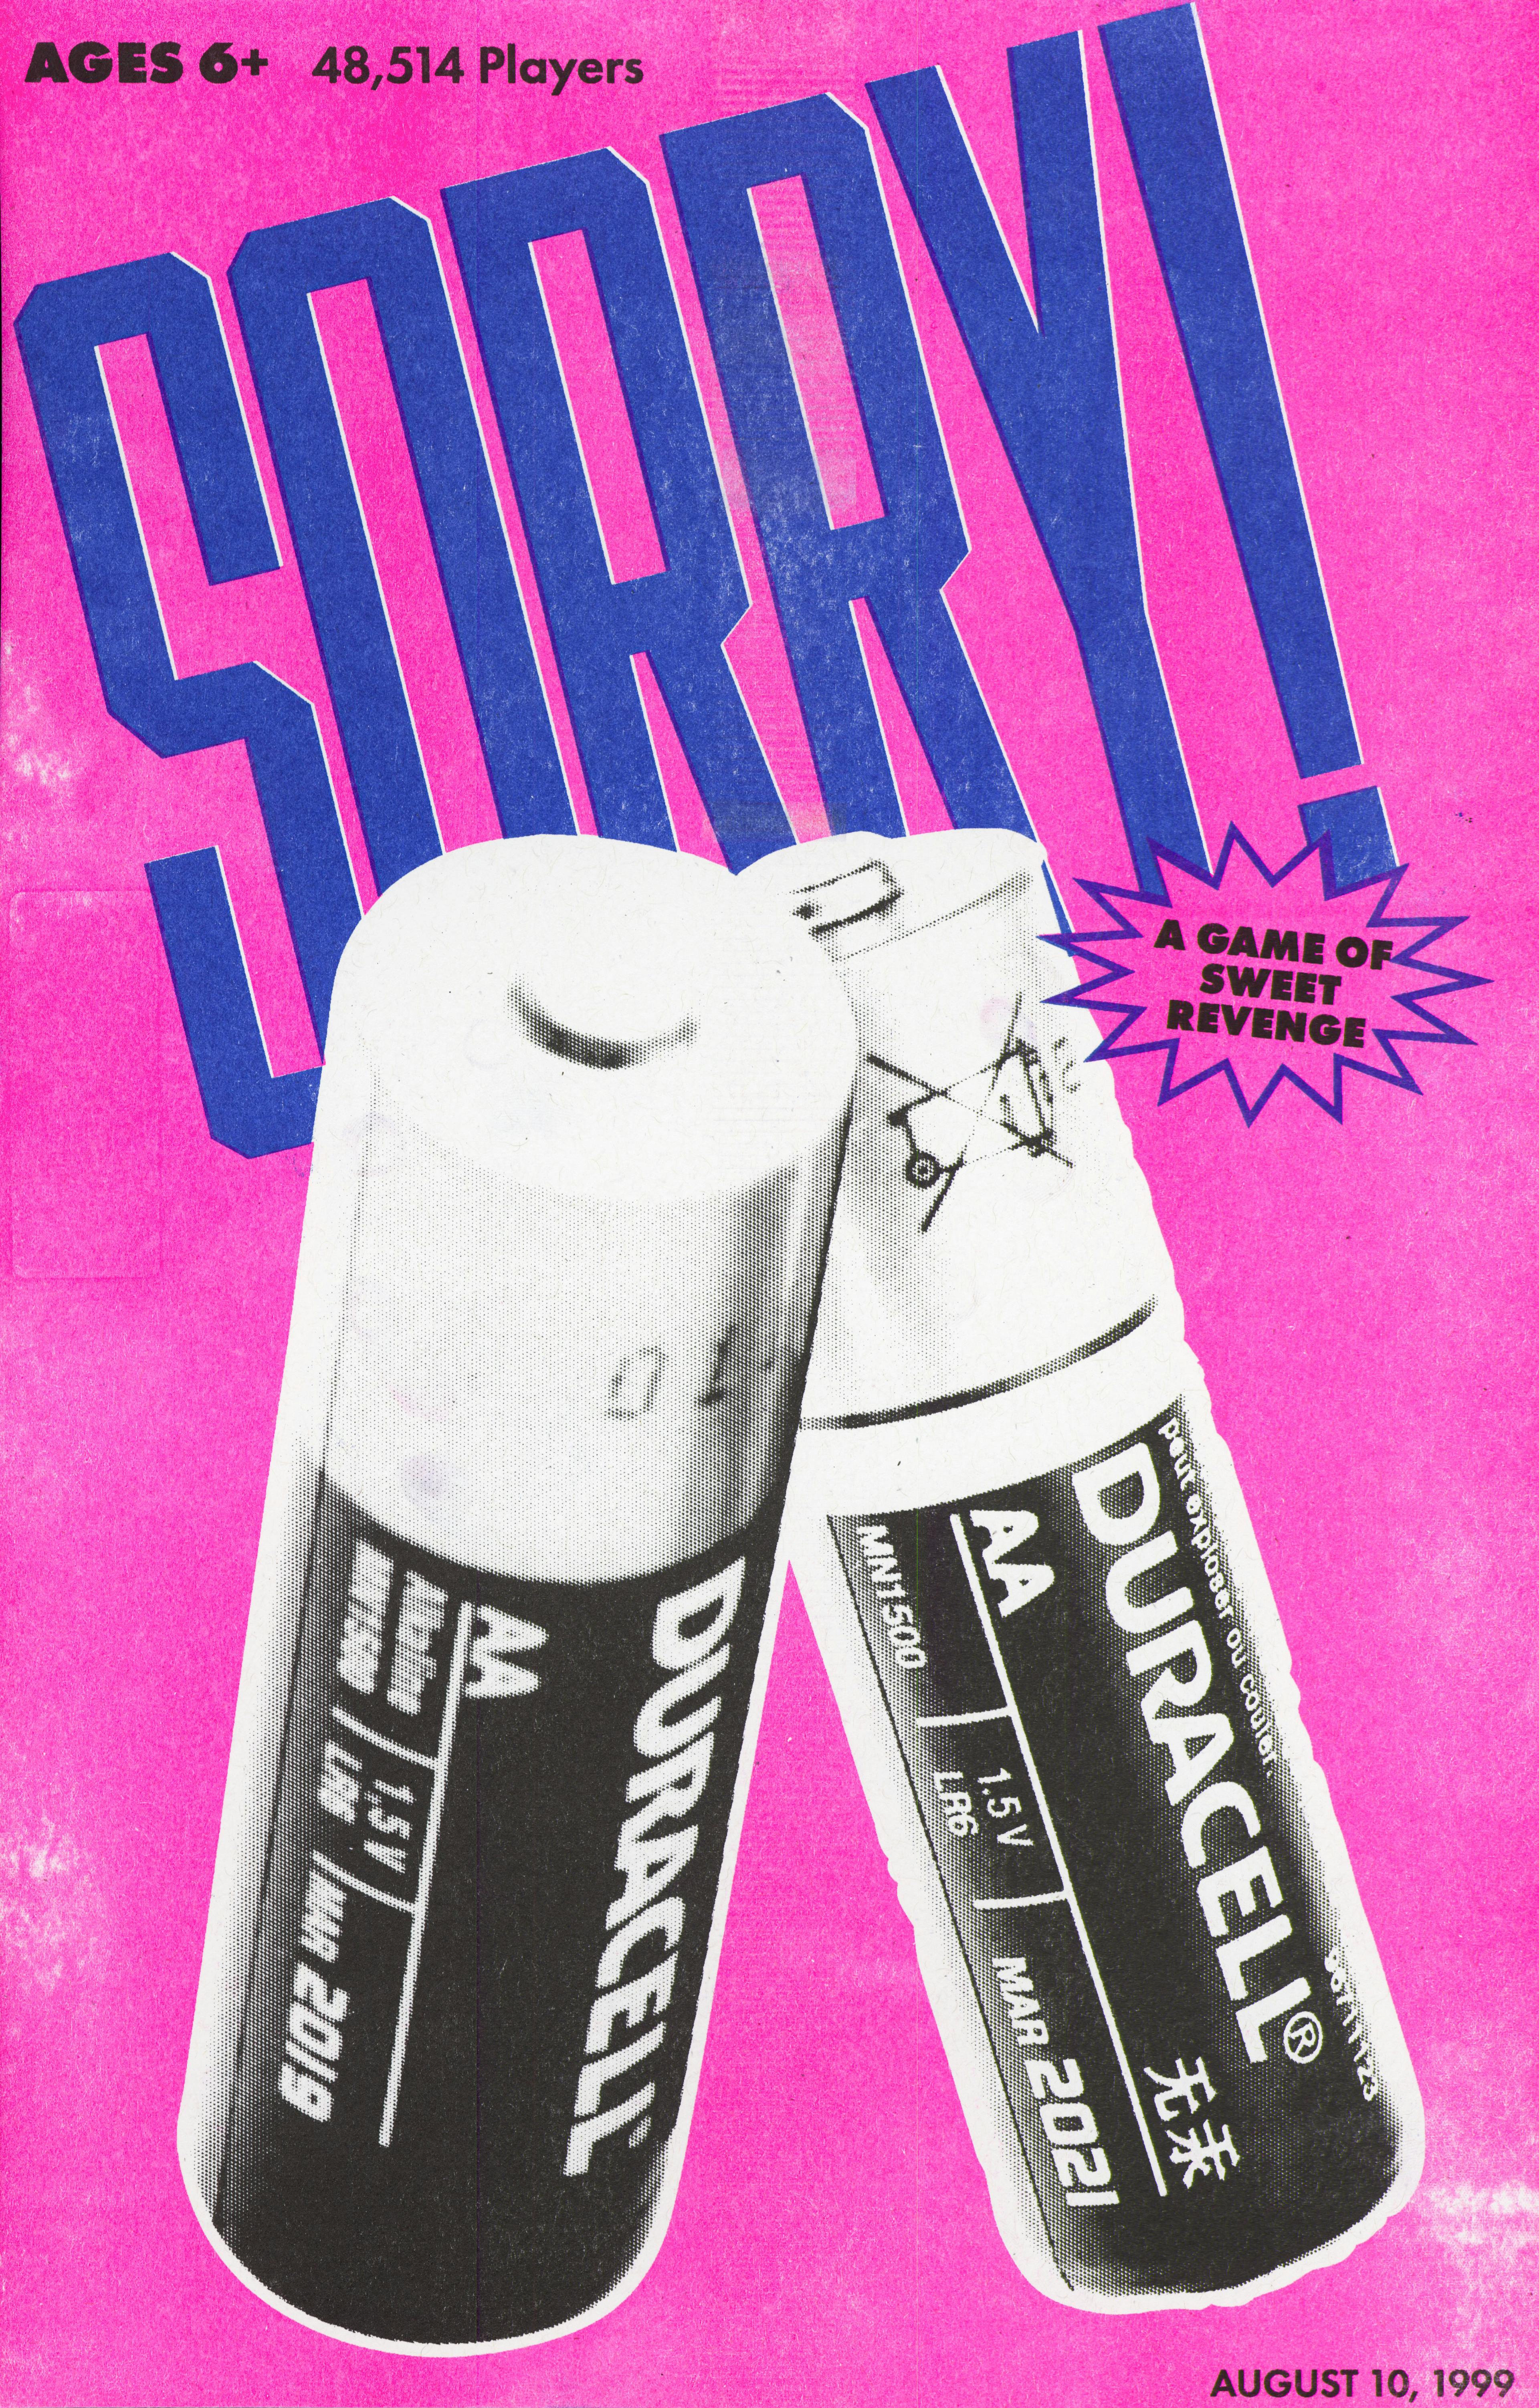 A pink poster with "Sorry" in big blue letters with a grayscale photo of two batteries